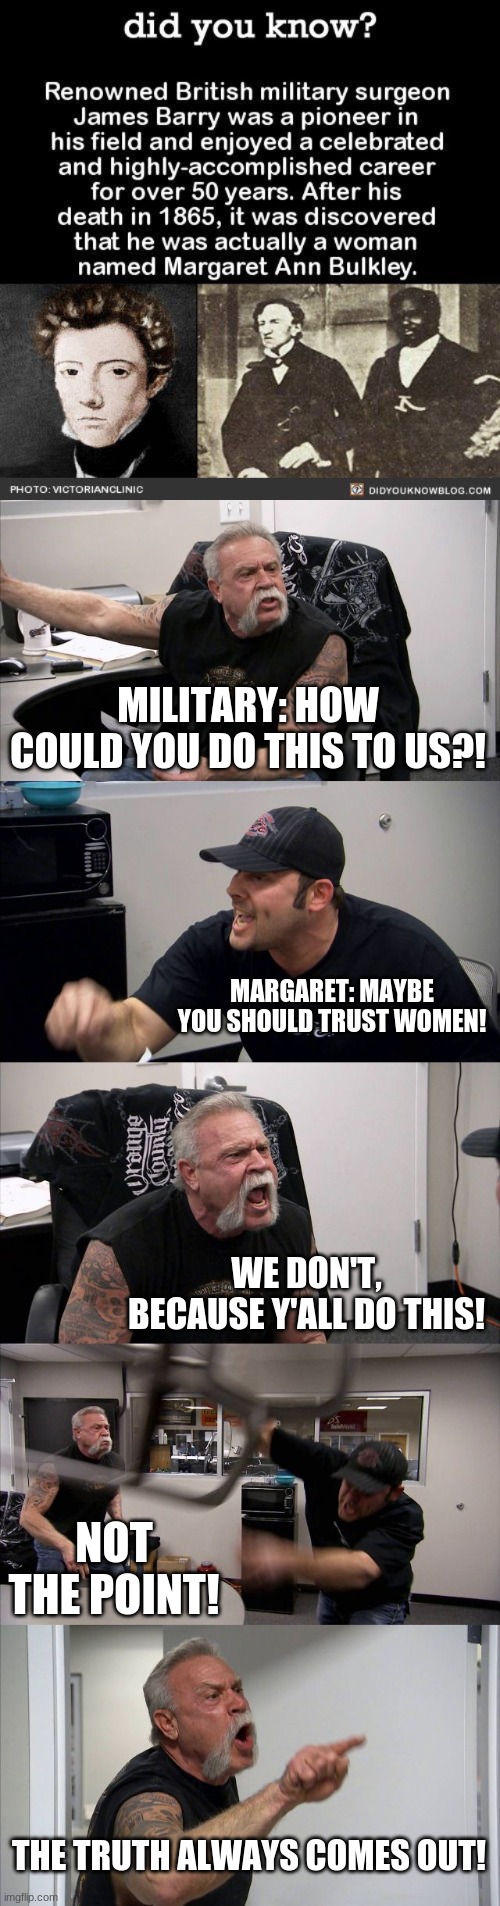 hehe | MILITARY: HOW COULD YOU DO THIS TO US?! MARGARET: MAYBE YOU SHOULD TRUST WOMEN! WE DON'T, BECAUSE Y'ALL DO THIS! NOT THE POINT! THE TRUTH ALWAYS COMES OUT! | image tagged in memes,american chopper argument | made w/ Imgflip meme maker